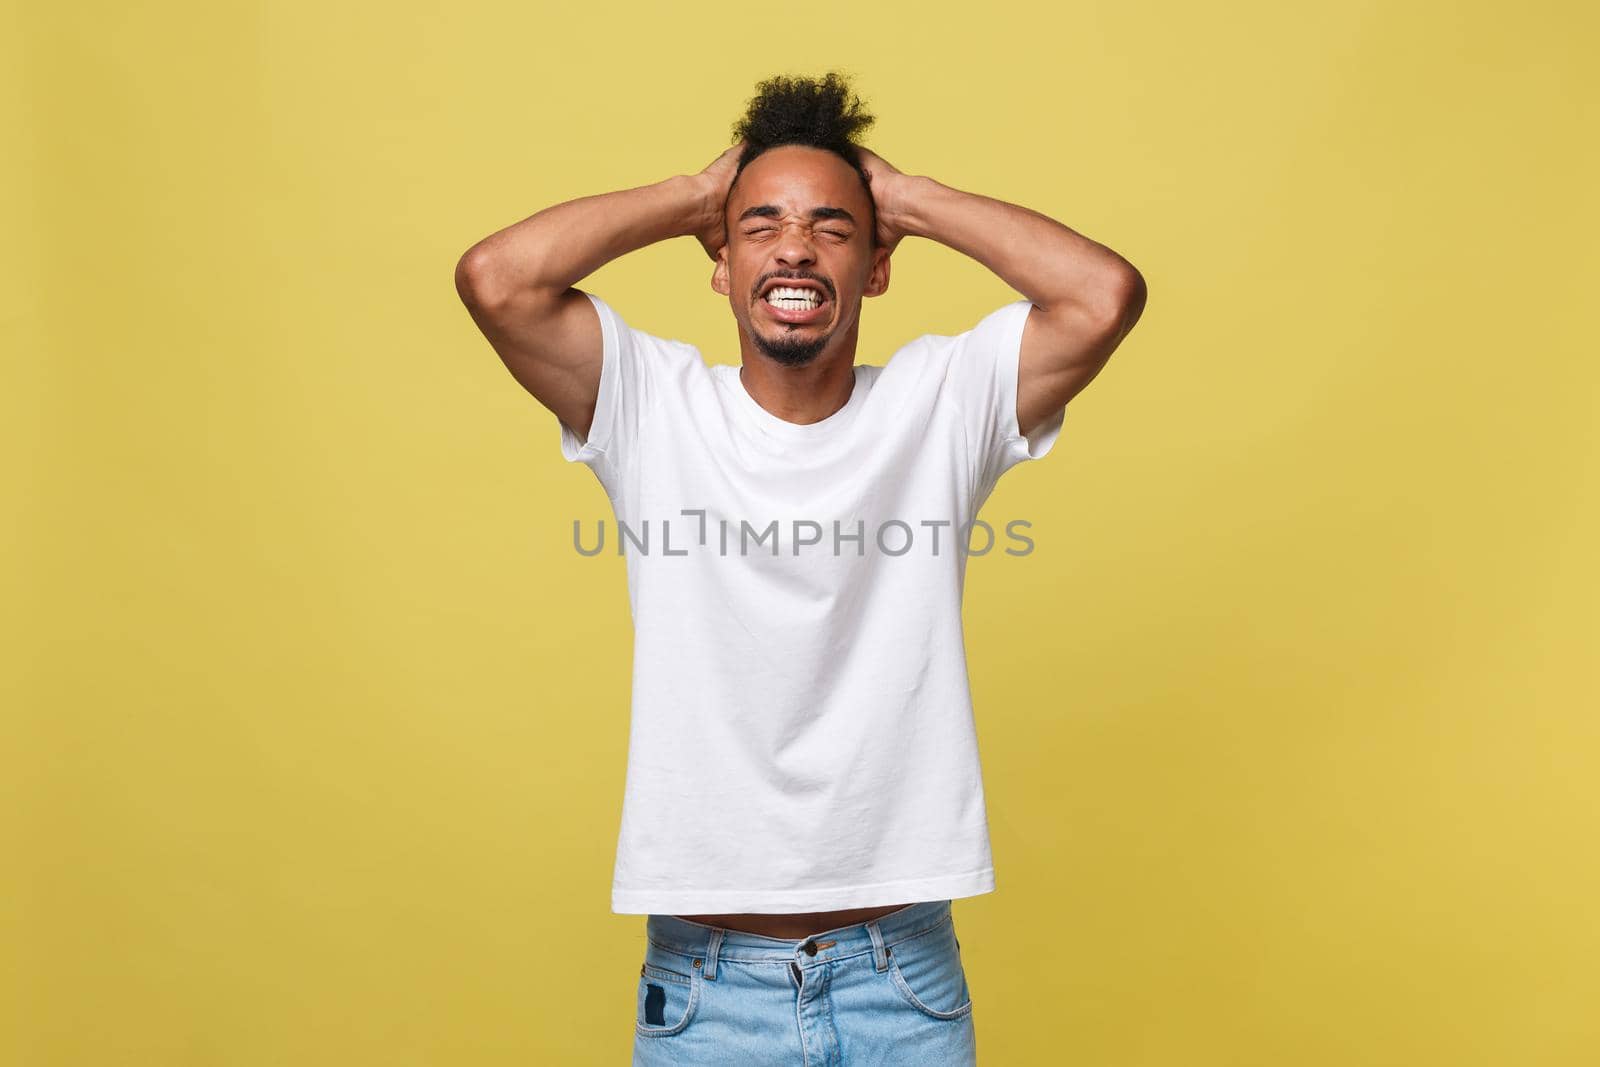 Portrait of angry or annoyed young African American man in white shirt looking at the camera with displeased expression. Negative human expressions, emotions, feelings. Body language